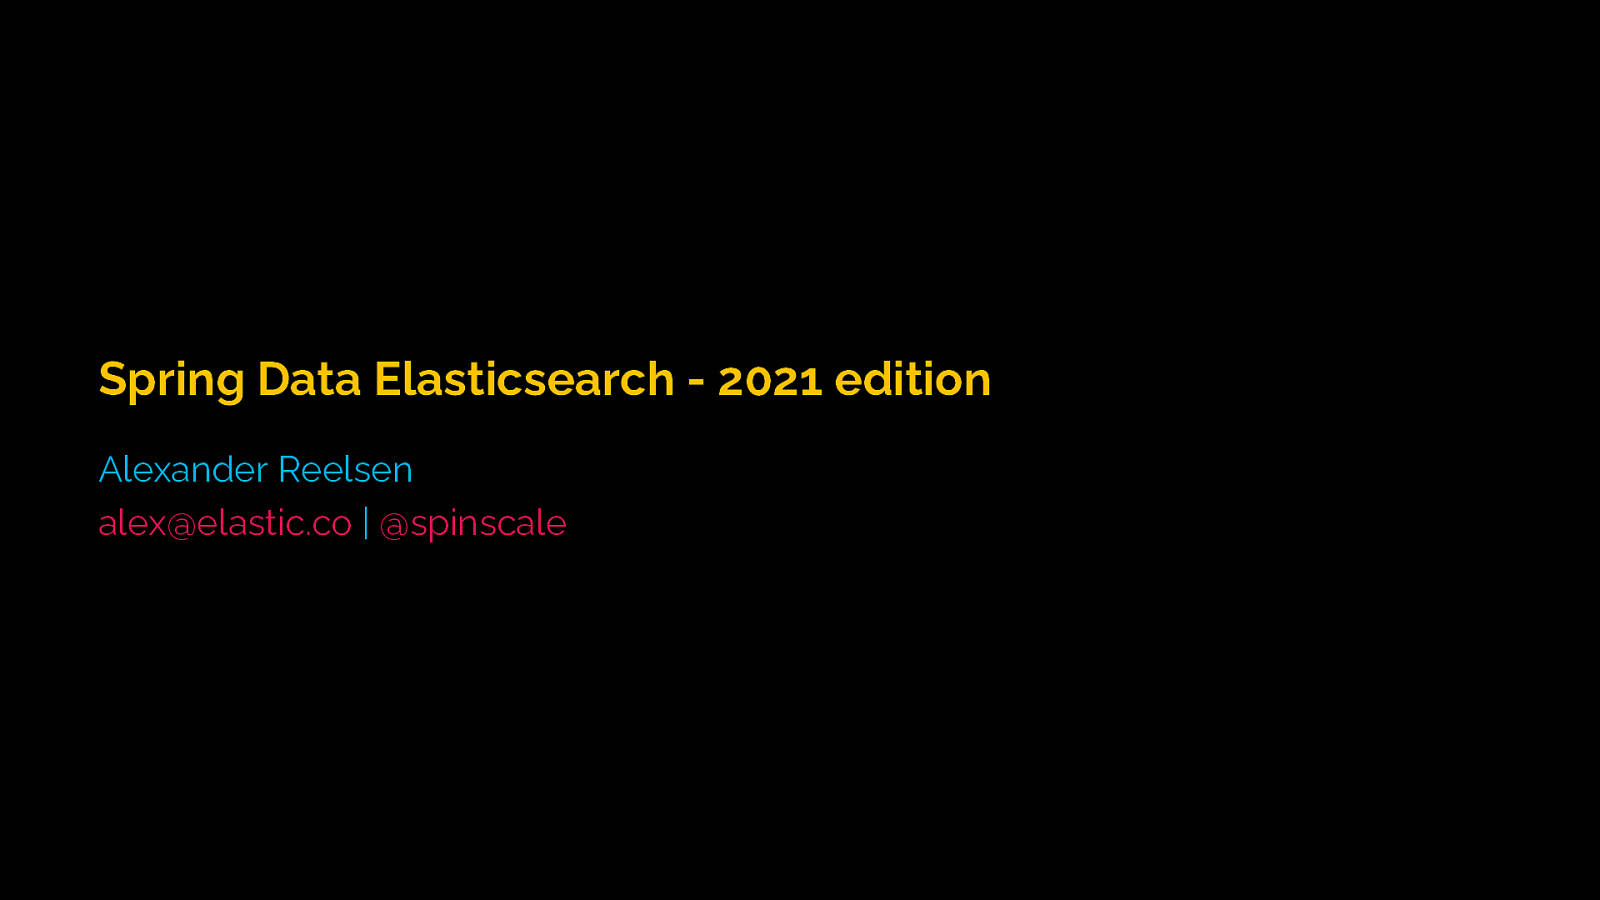 Introduction into Spring Data Elasticsearch